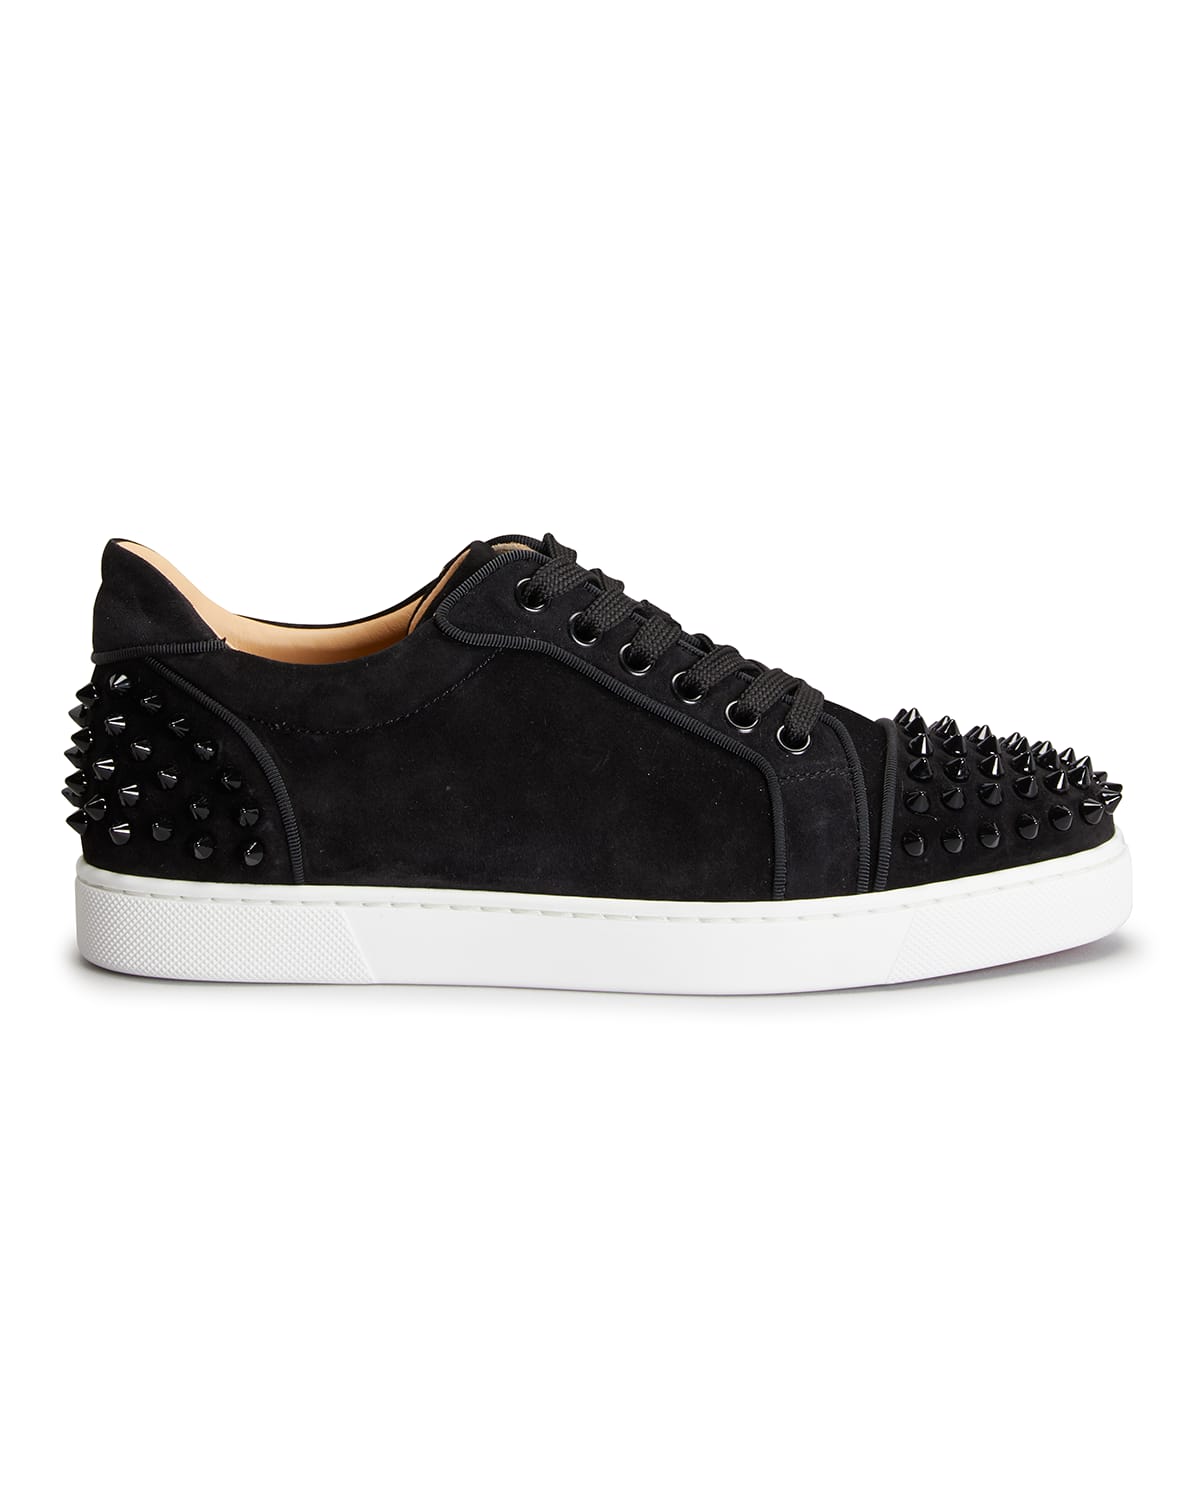 Vieira Spike Suede Low-Top Sneakers